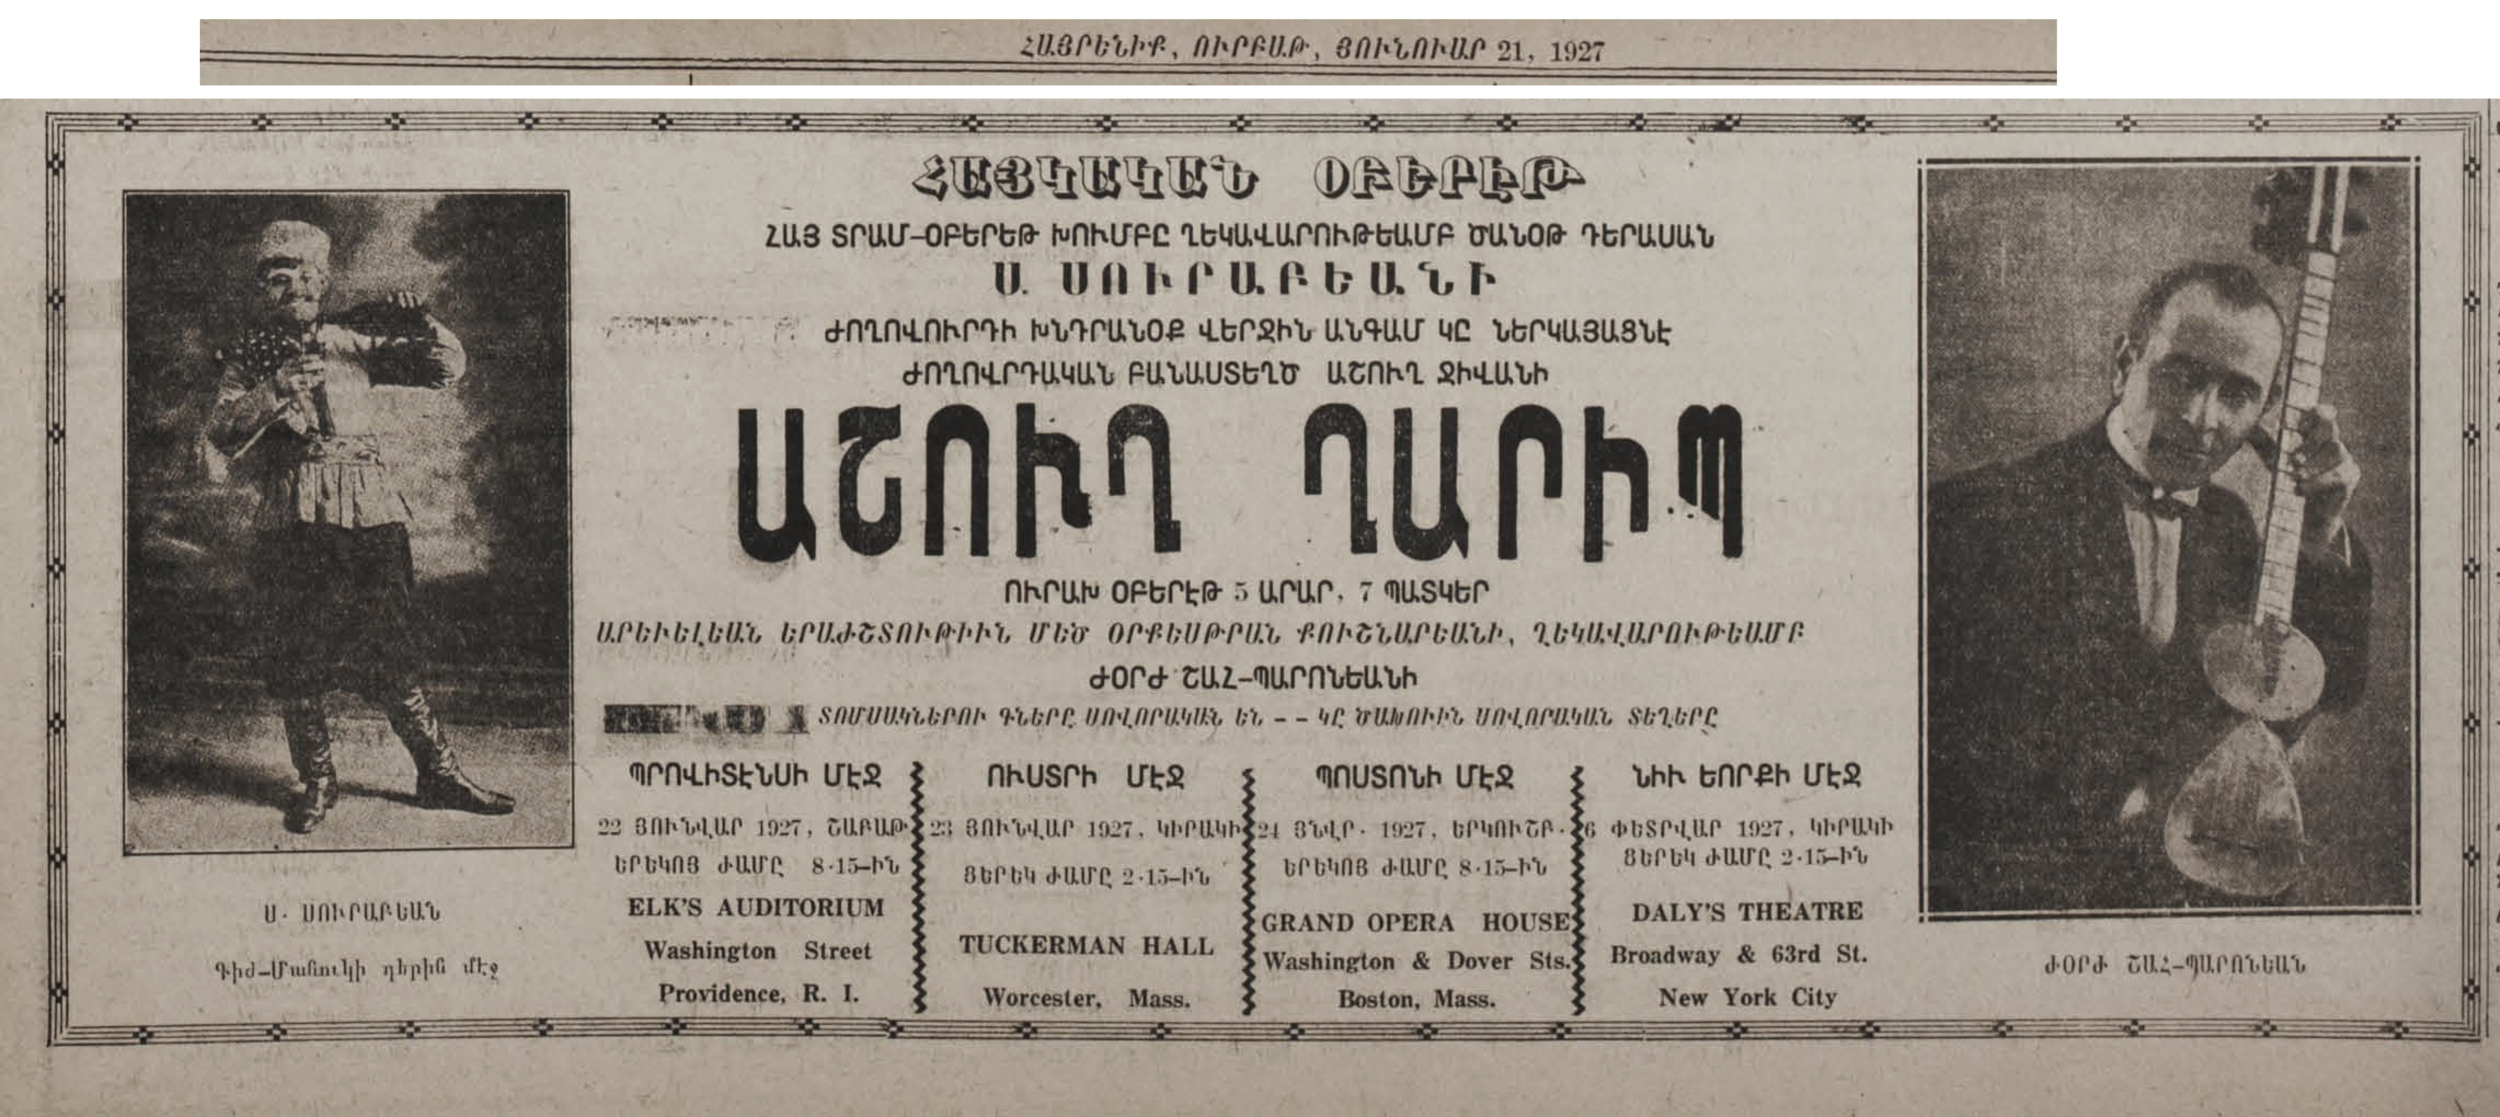  Listing for a series of concerts given around New York and New England by George Shah-Baronian with S. Sourapian in the January 21, 1927 issue of the Hairenik Daily (Scan: National Library of Armenia) 